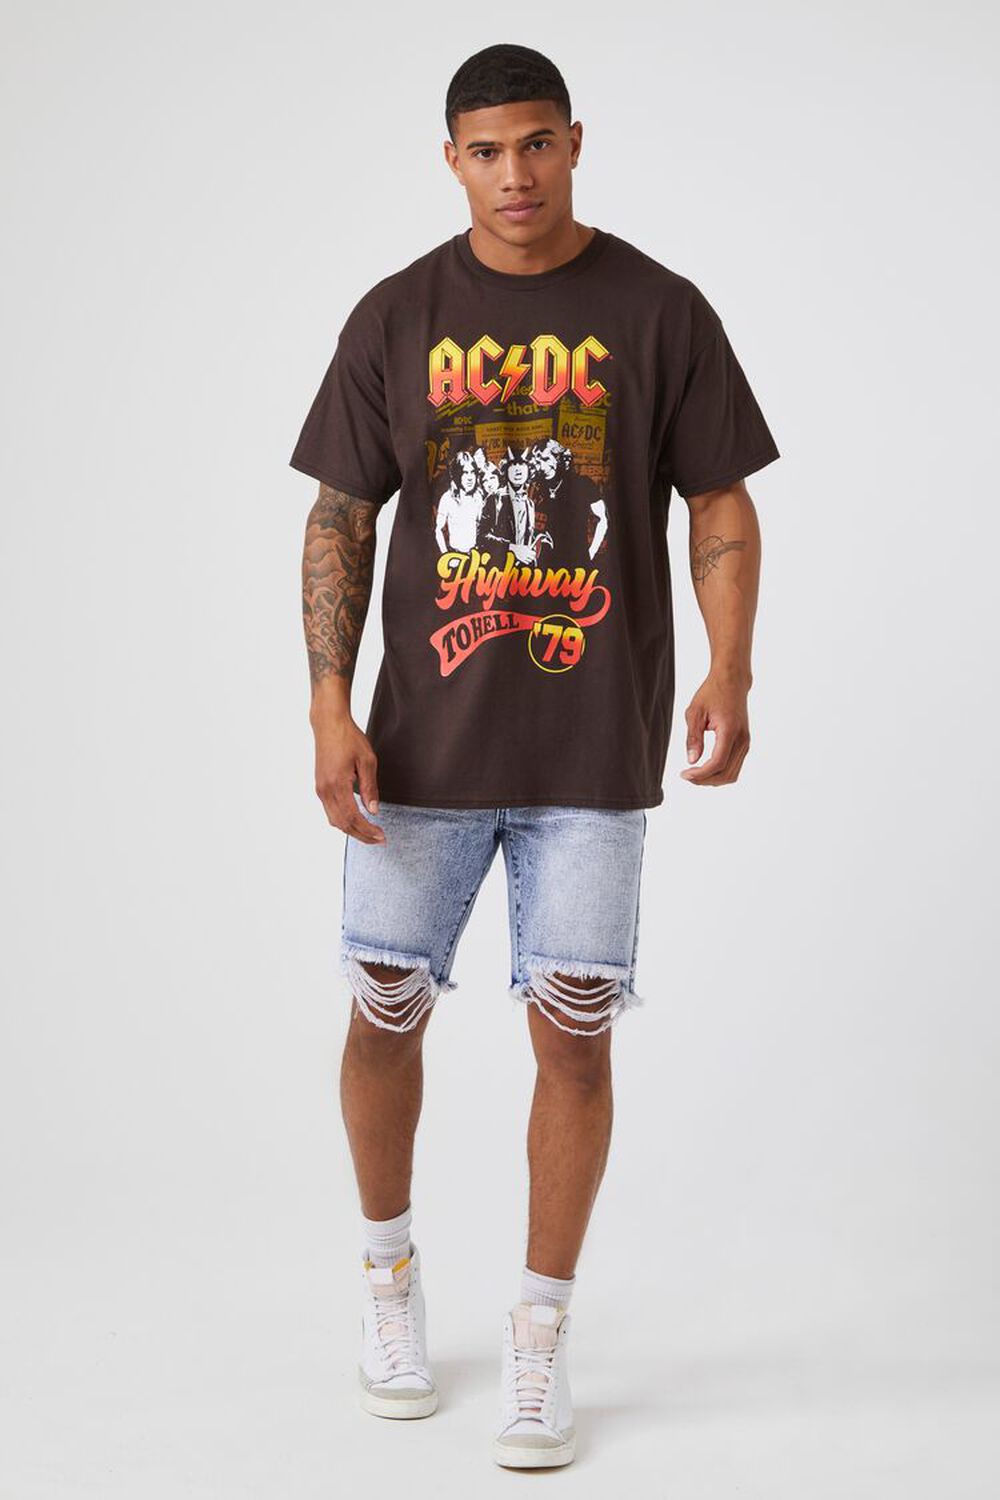 Forever 21 ACDC Graphic Hockey Jersey